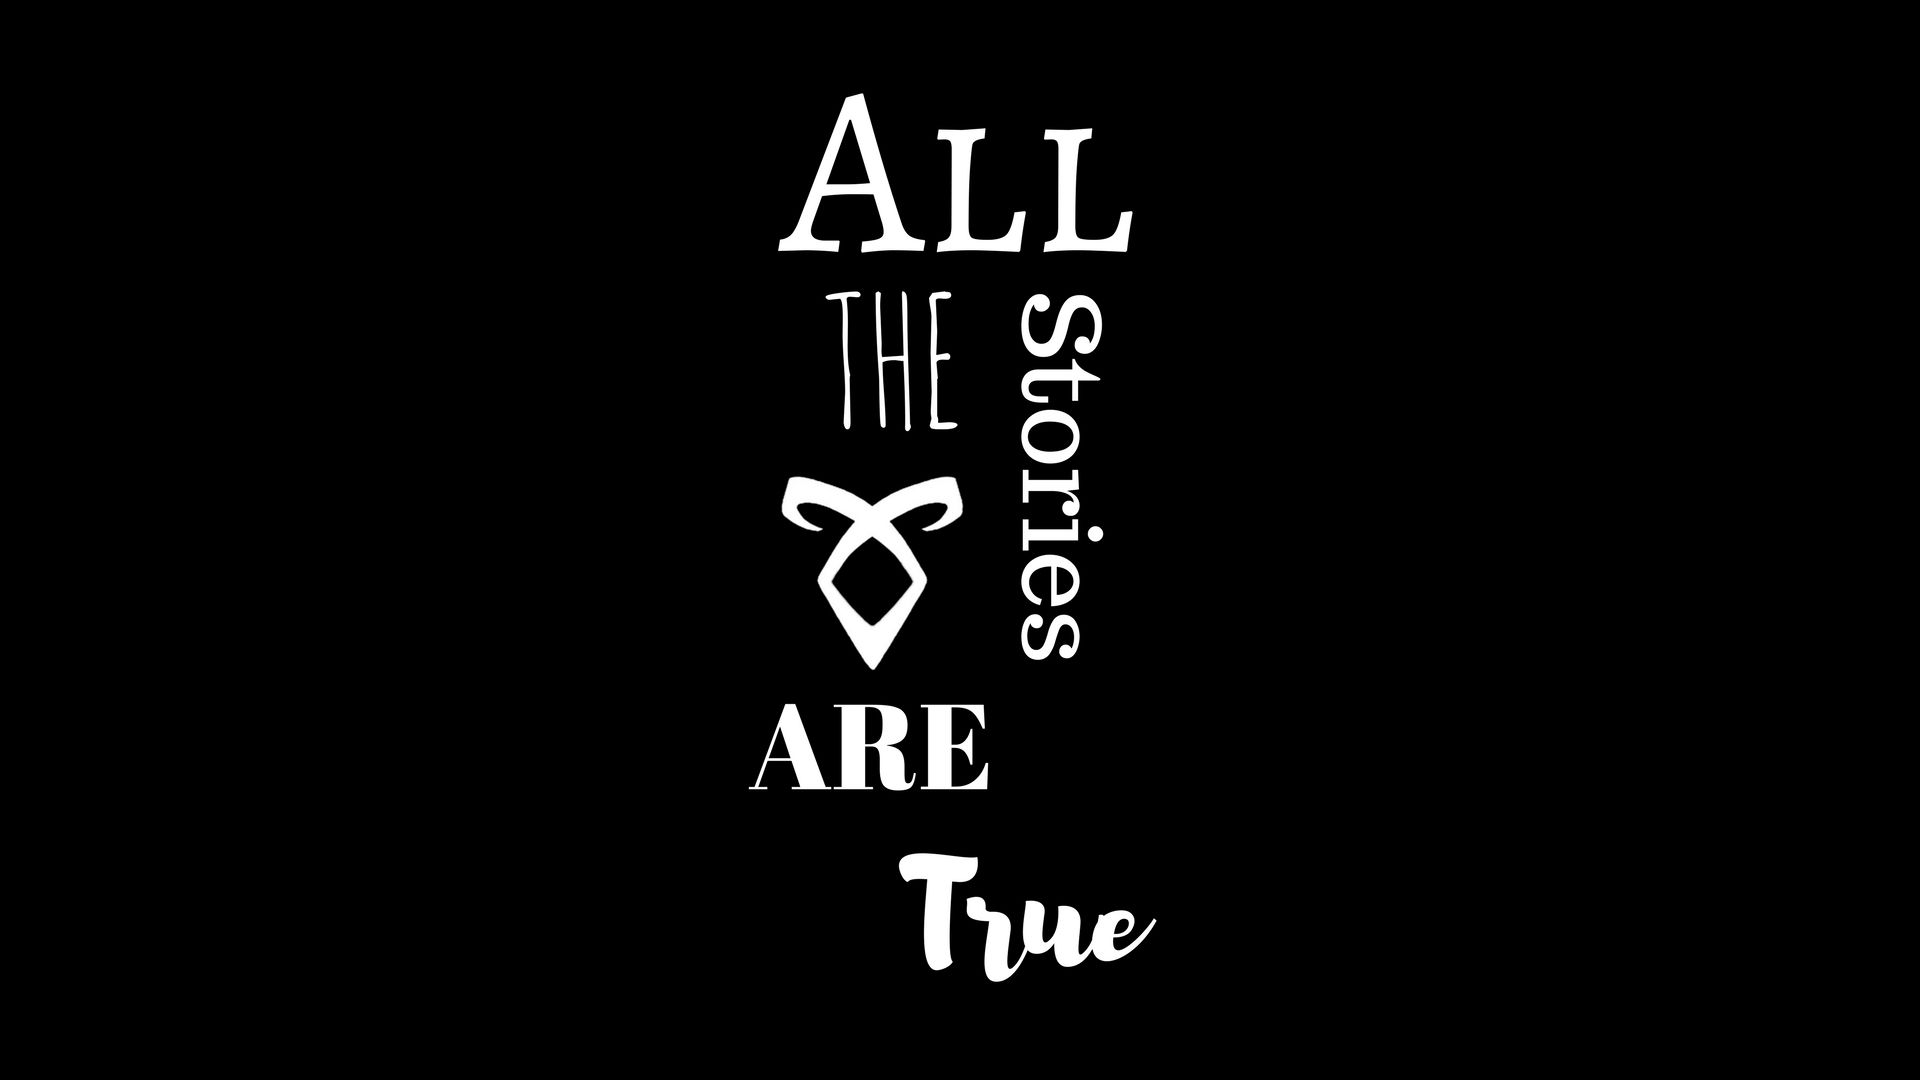 1920x1080 All The Stories Are True! #shadowhunters #jace #clary #power #tumblr #runes #background | Shadowhunters, Shadow hunters, True